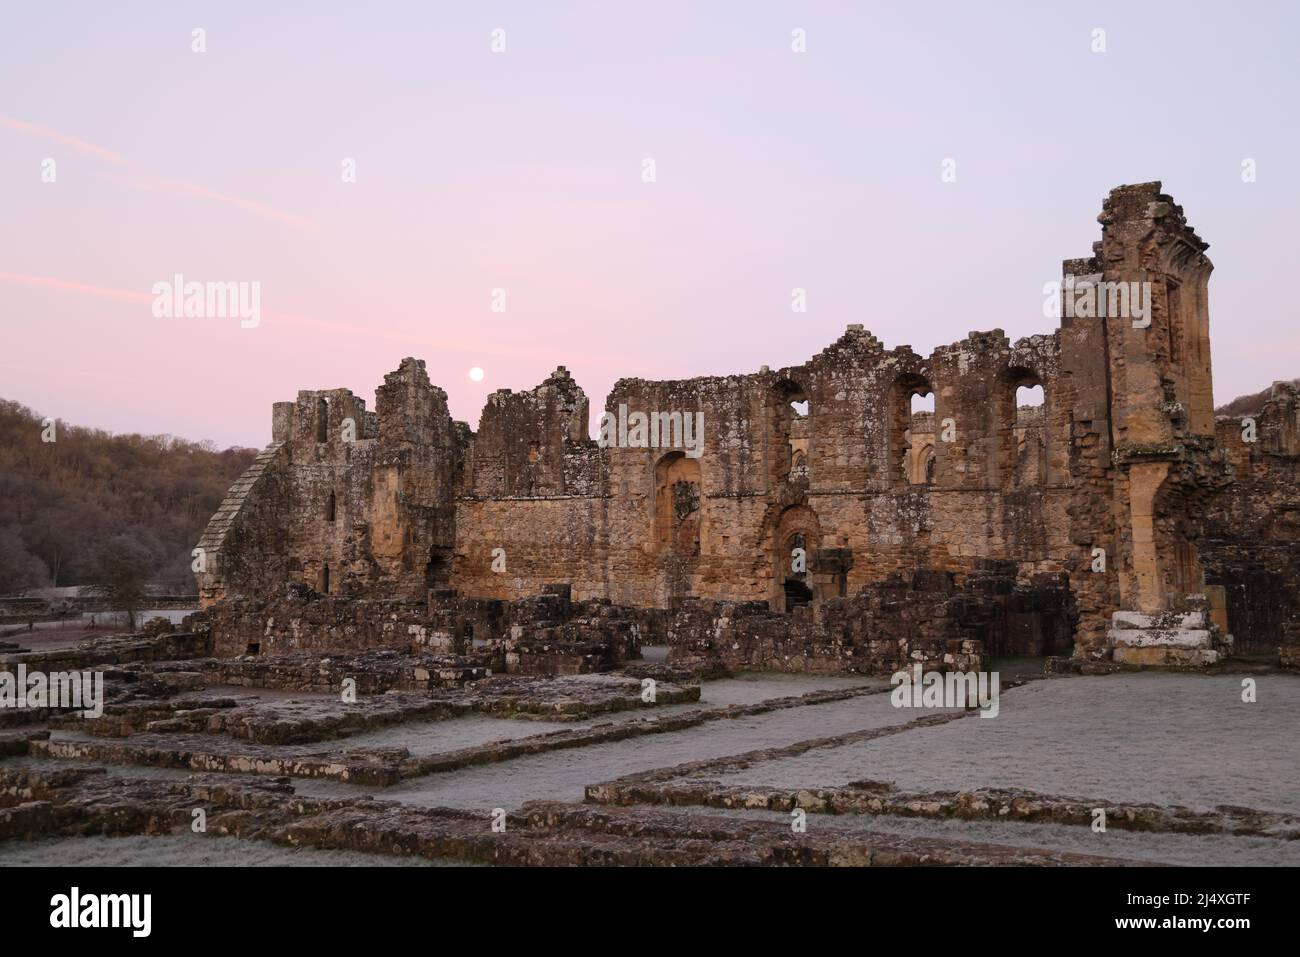 Infirmary cloister wall: cloister behind, & ruins foreground of Infirmary Hall & Abott's House. Ruined Rievaulx Cistercian Abbey. Dawn after moonrise. Stock Photo